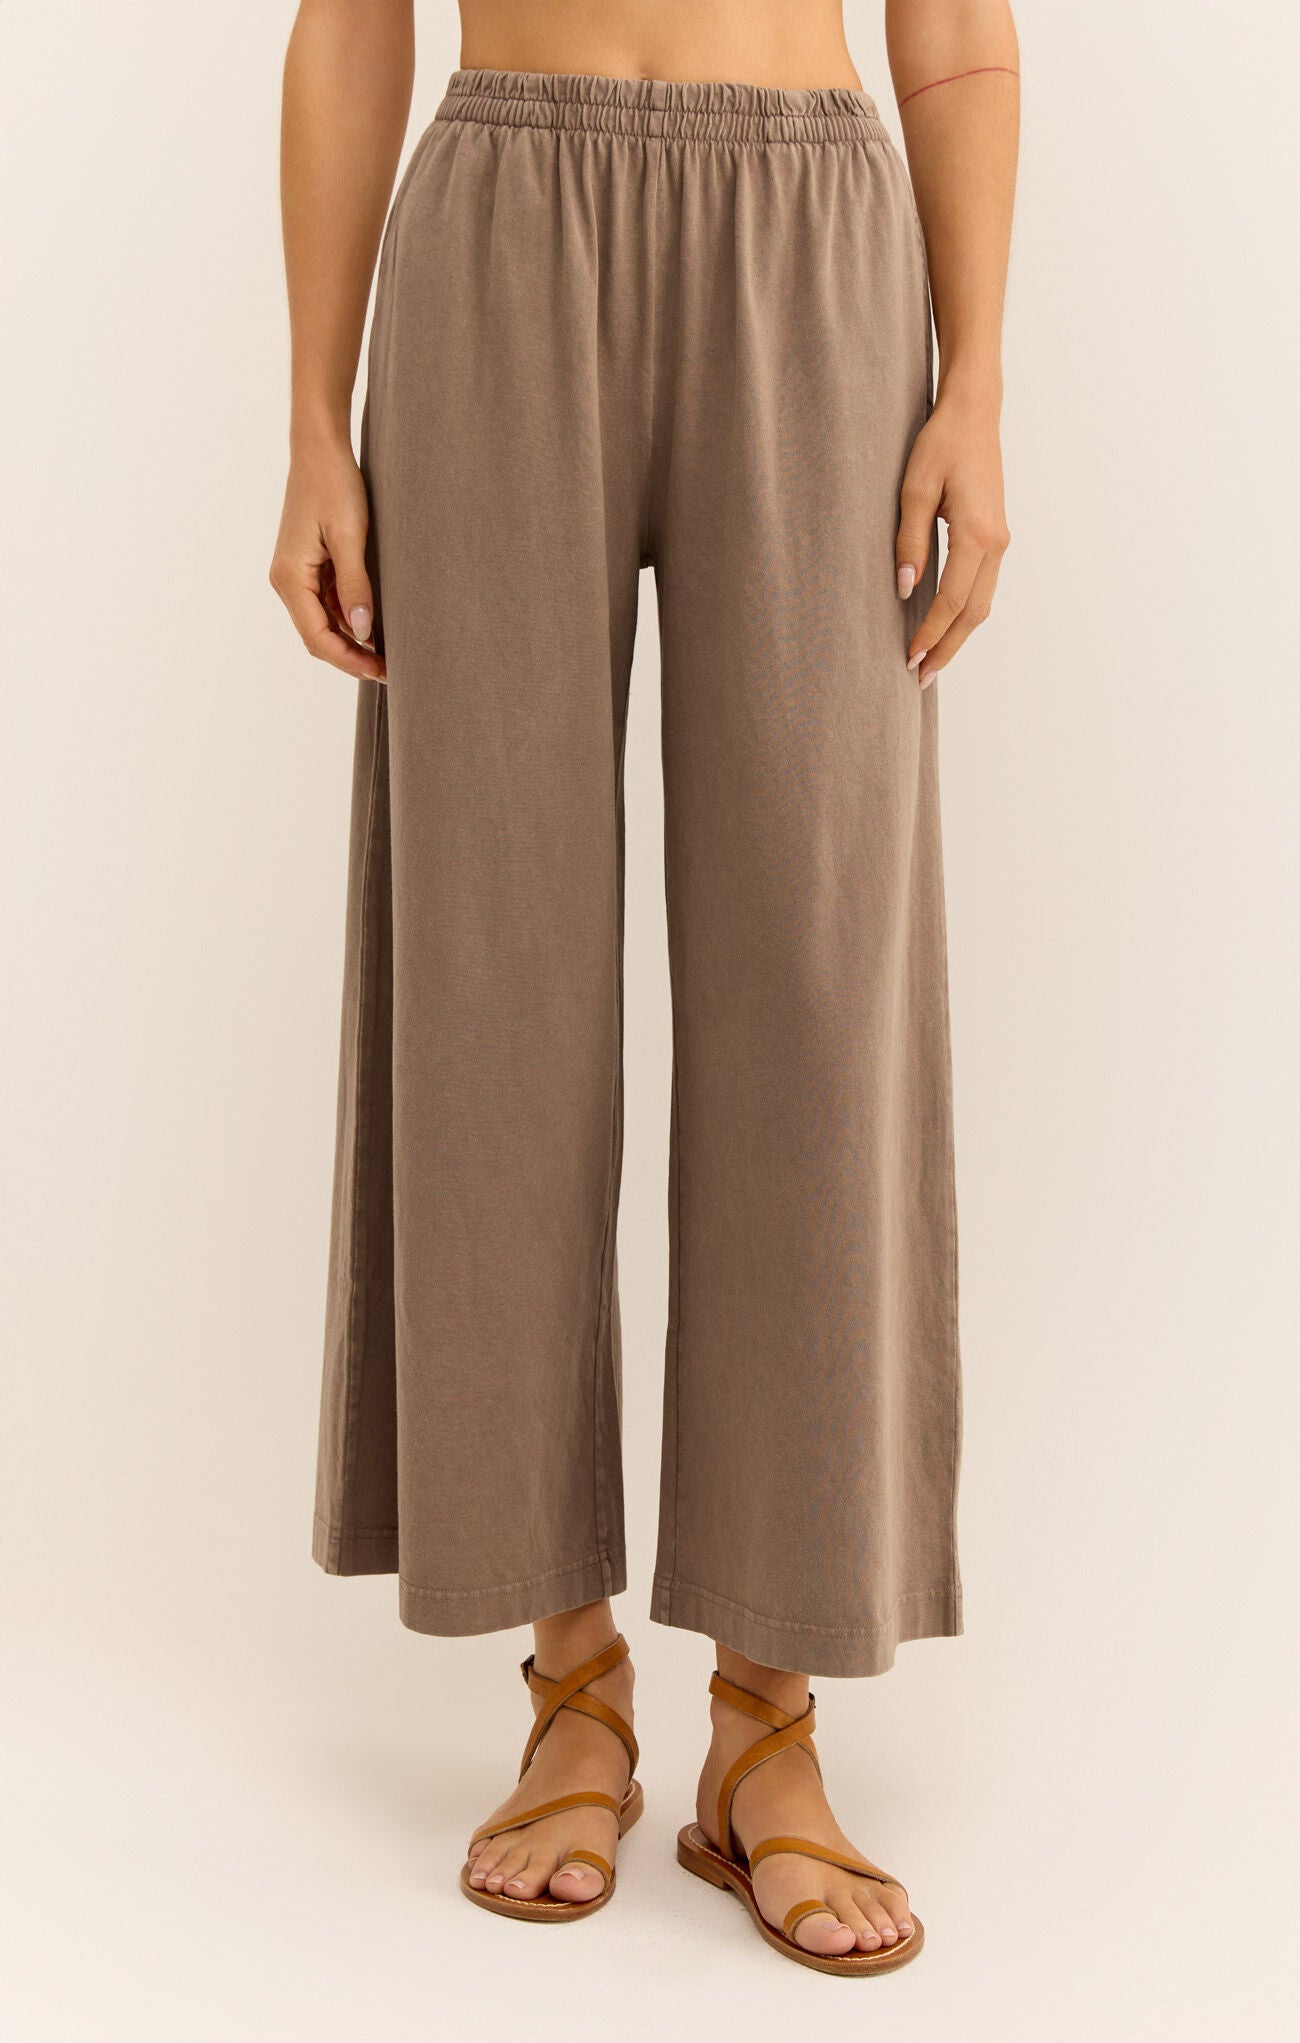 Scout Jersey Flare Pocket Pant - Iced Coffee - Brazos Avenue Market 